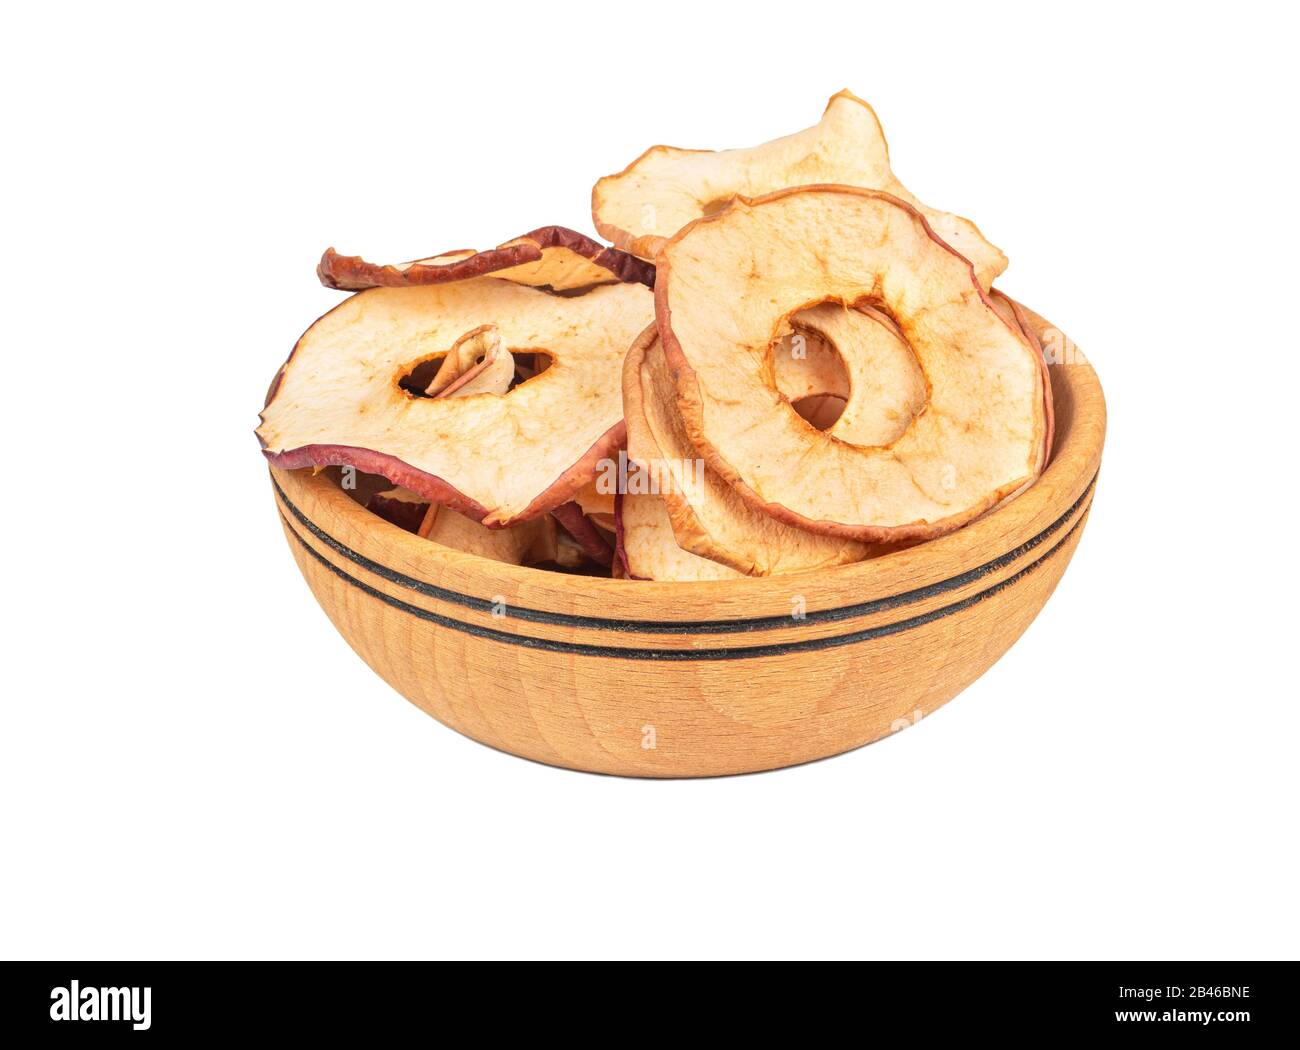 Apple chips in a wooden bowl on a white background Stock Photo